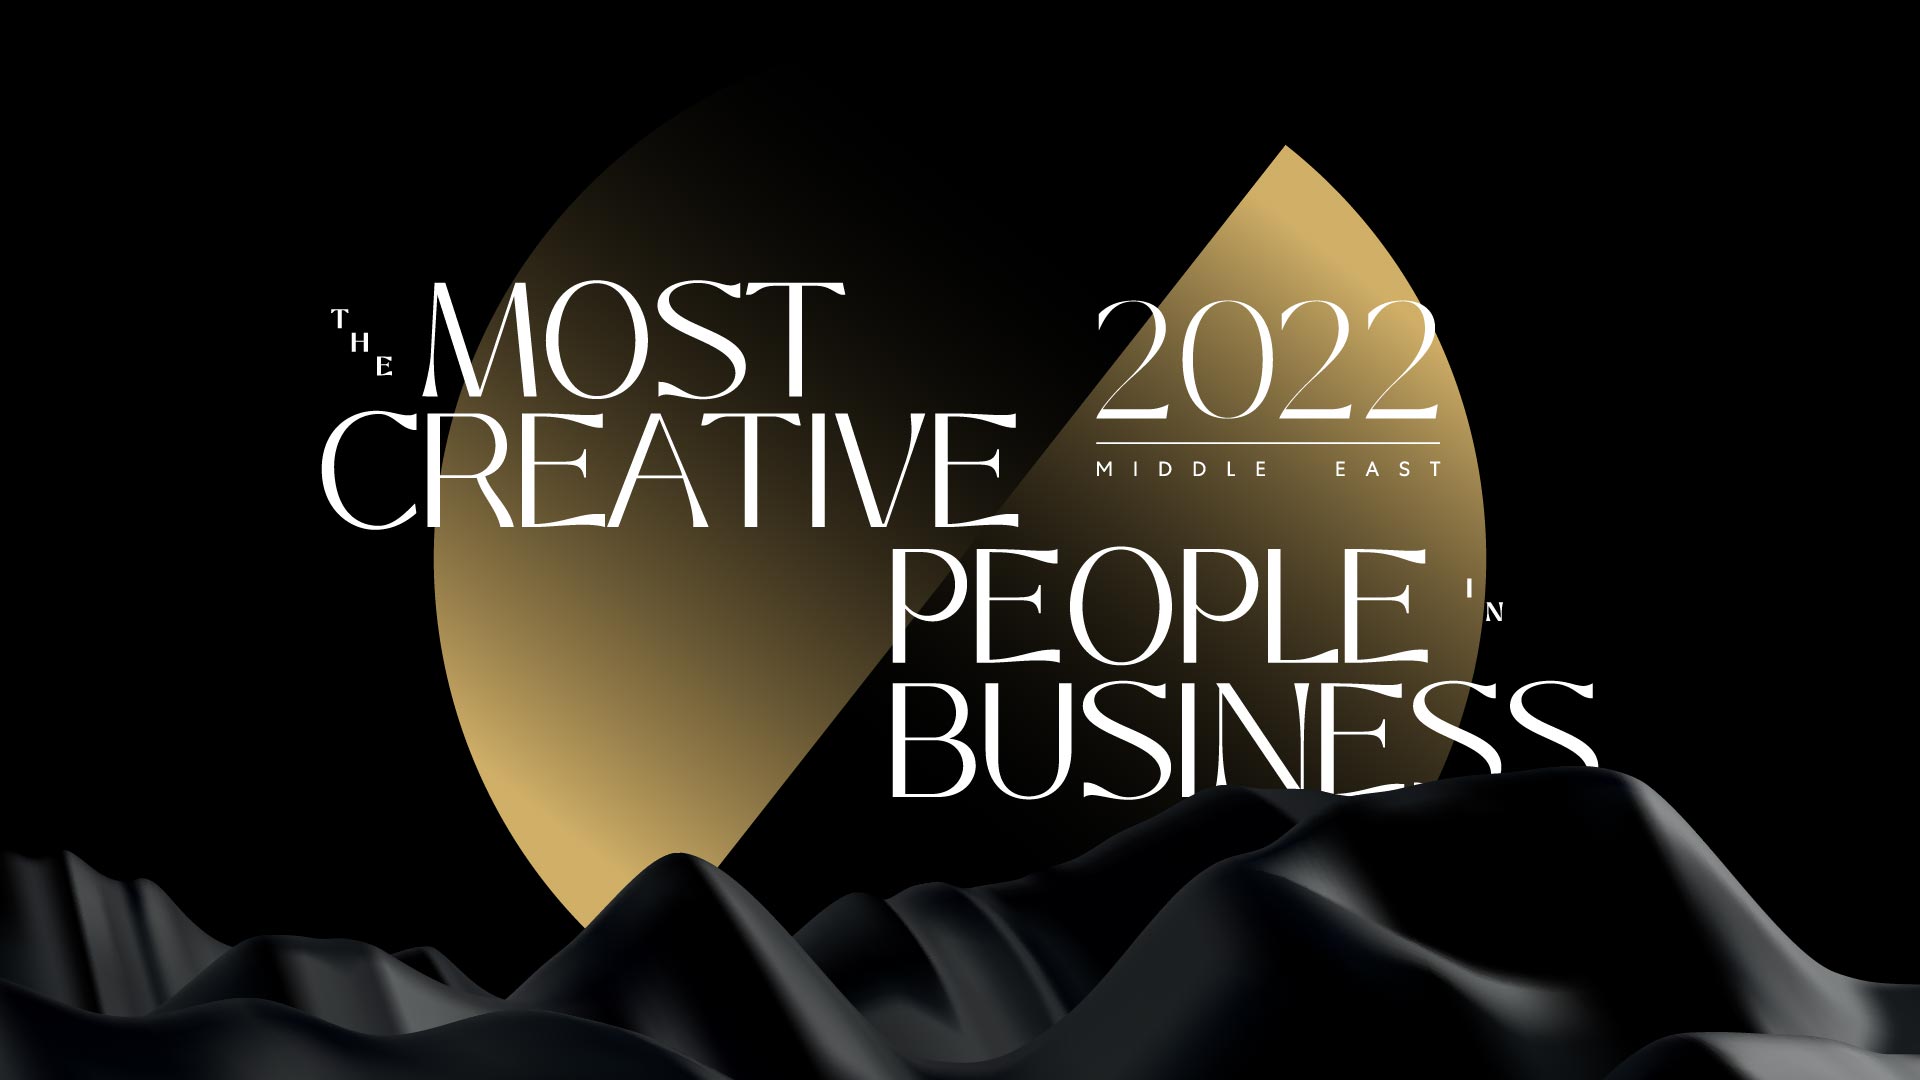 These are the Most Creative People in Business, in the Middle East